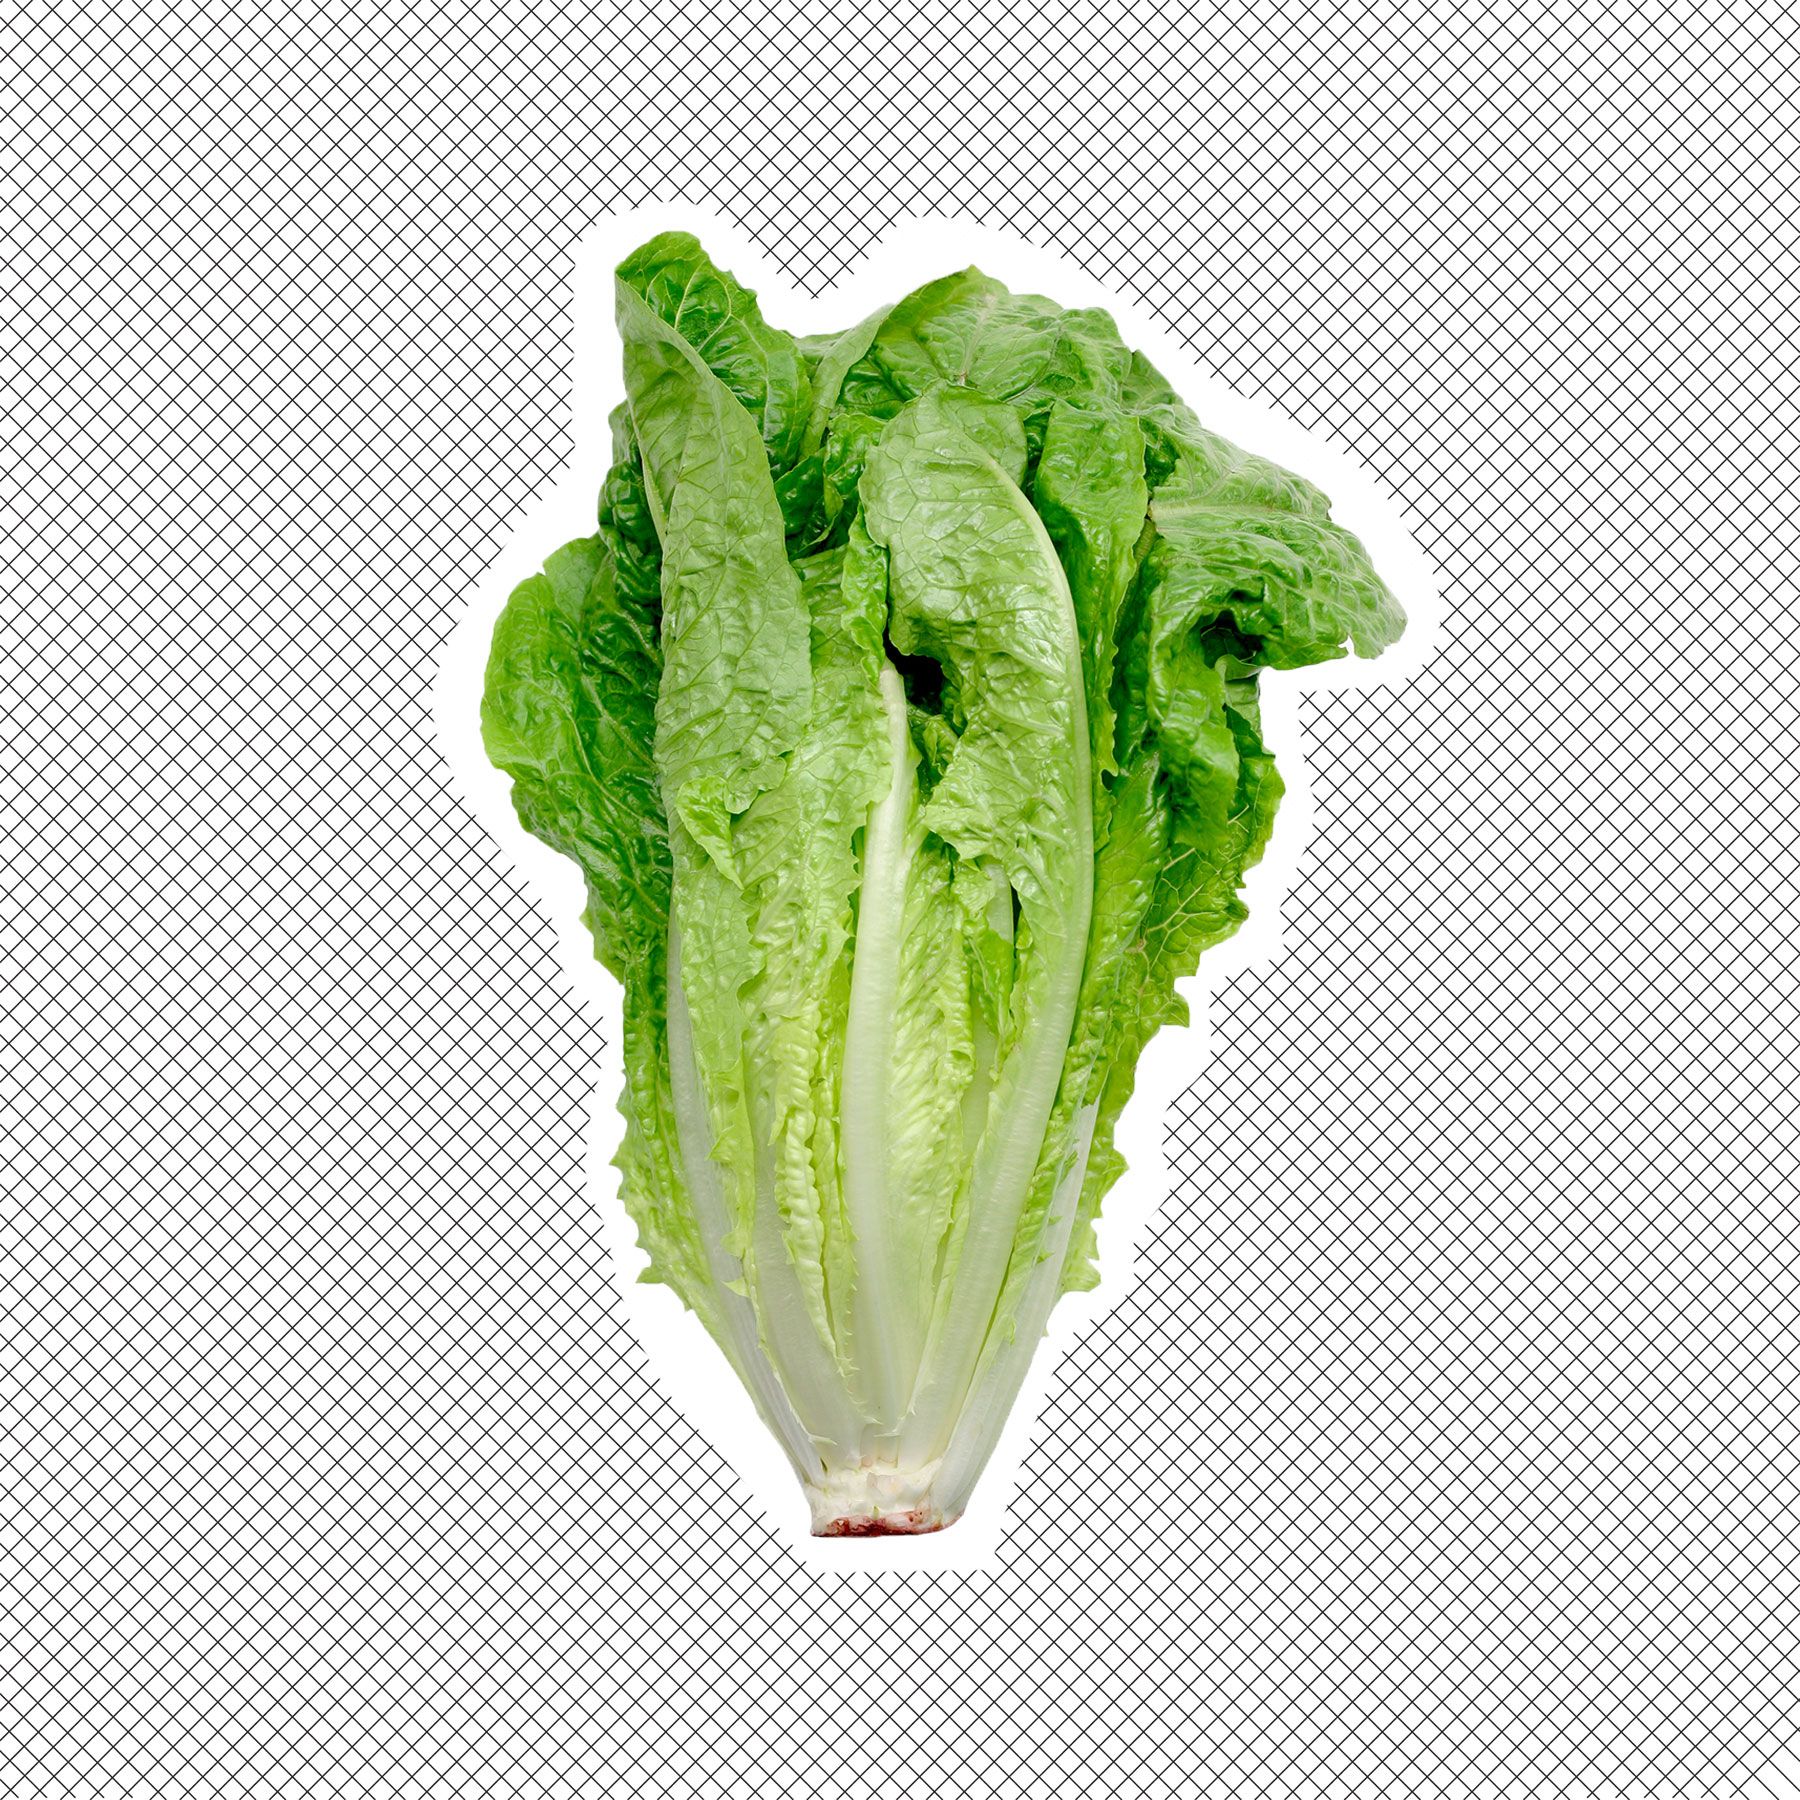 romaine lettuce coloring page